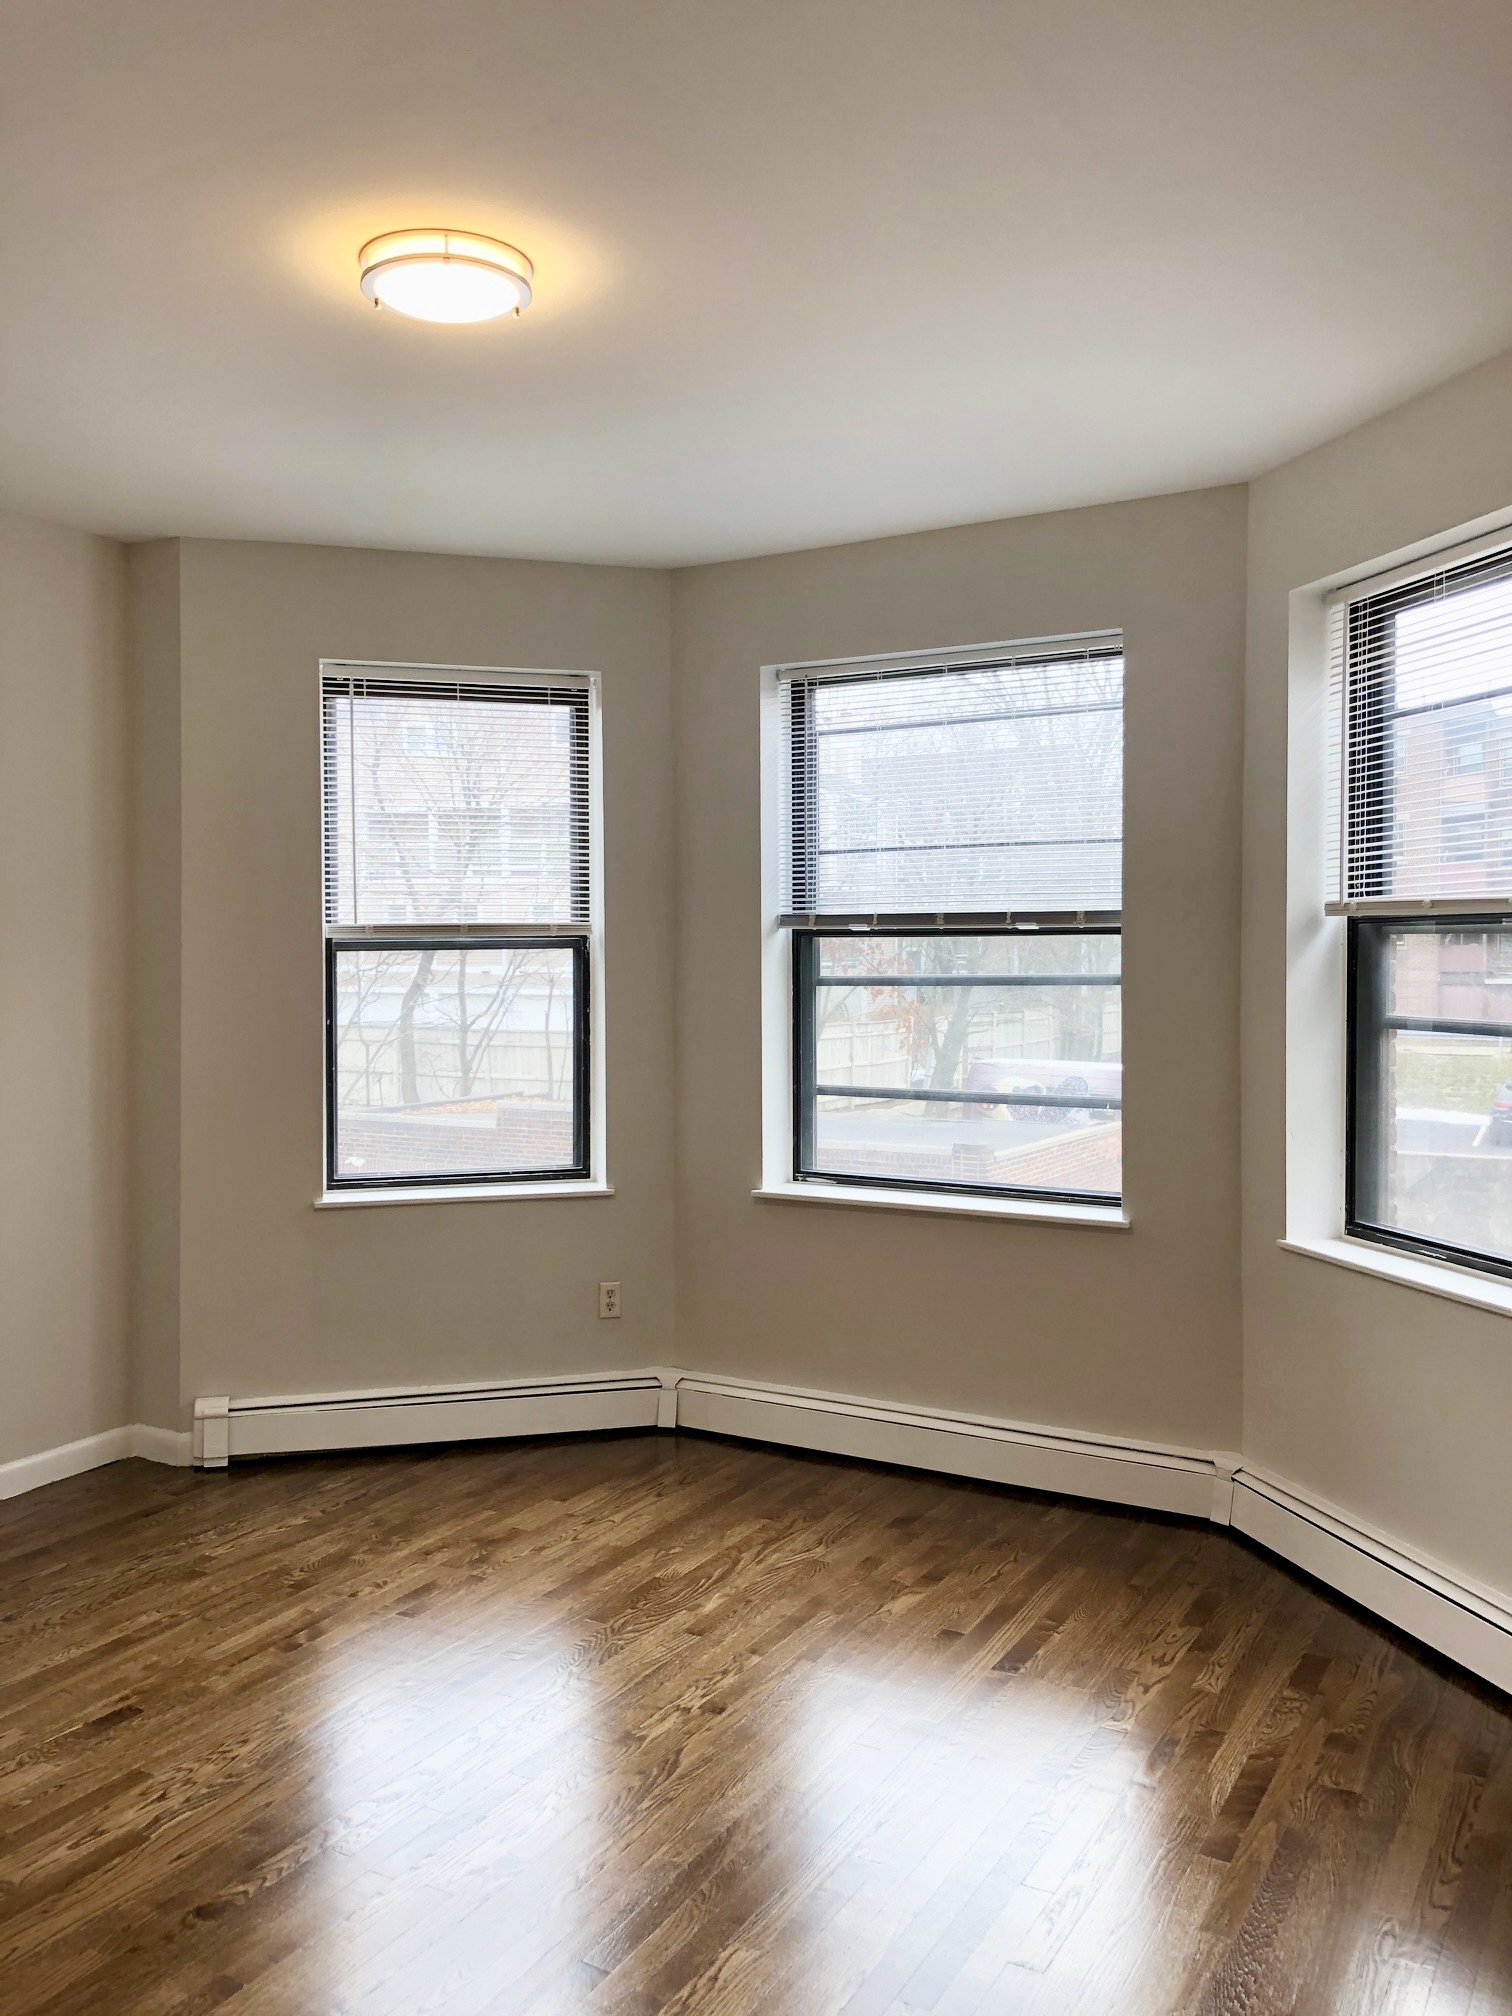 Photos of apartment on Stearns Rd.,Brookline MA 02446